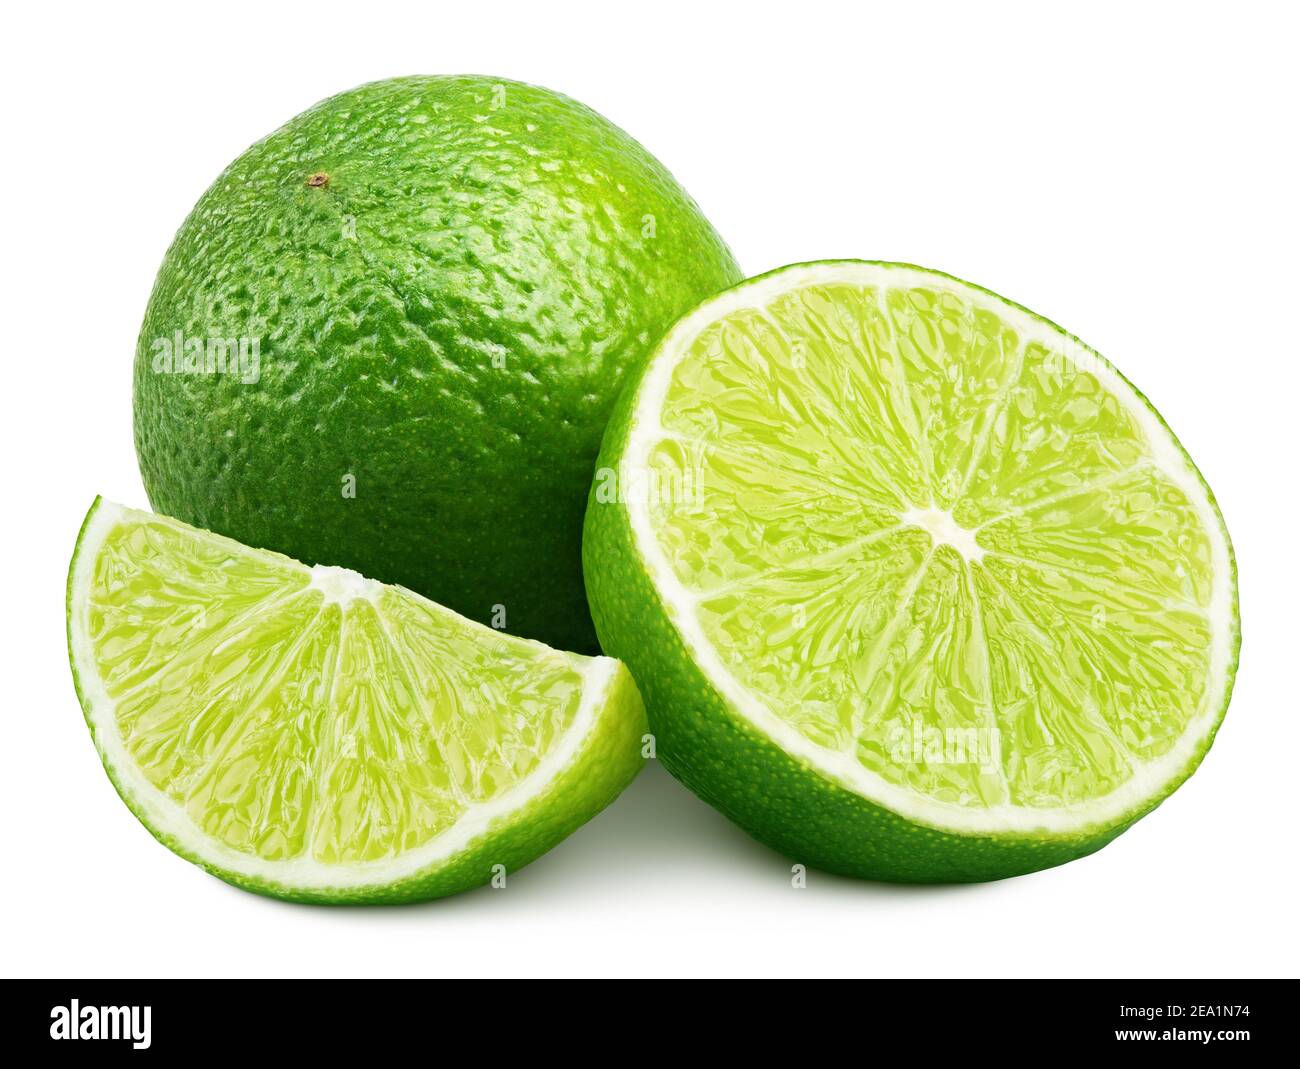 Citrus lime fruit with slice and half isolated on white background. Lime citrus fruit with clipping path Stock Photo